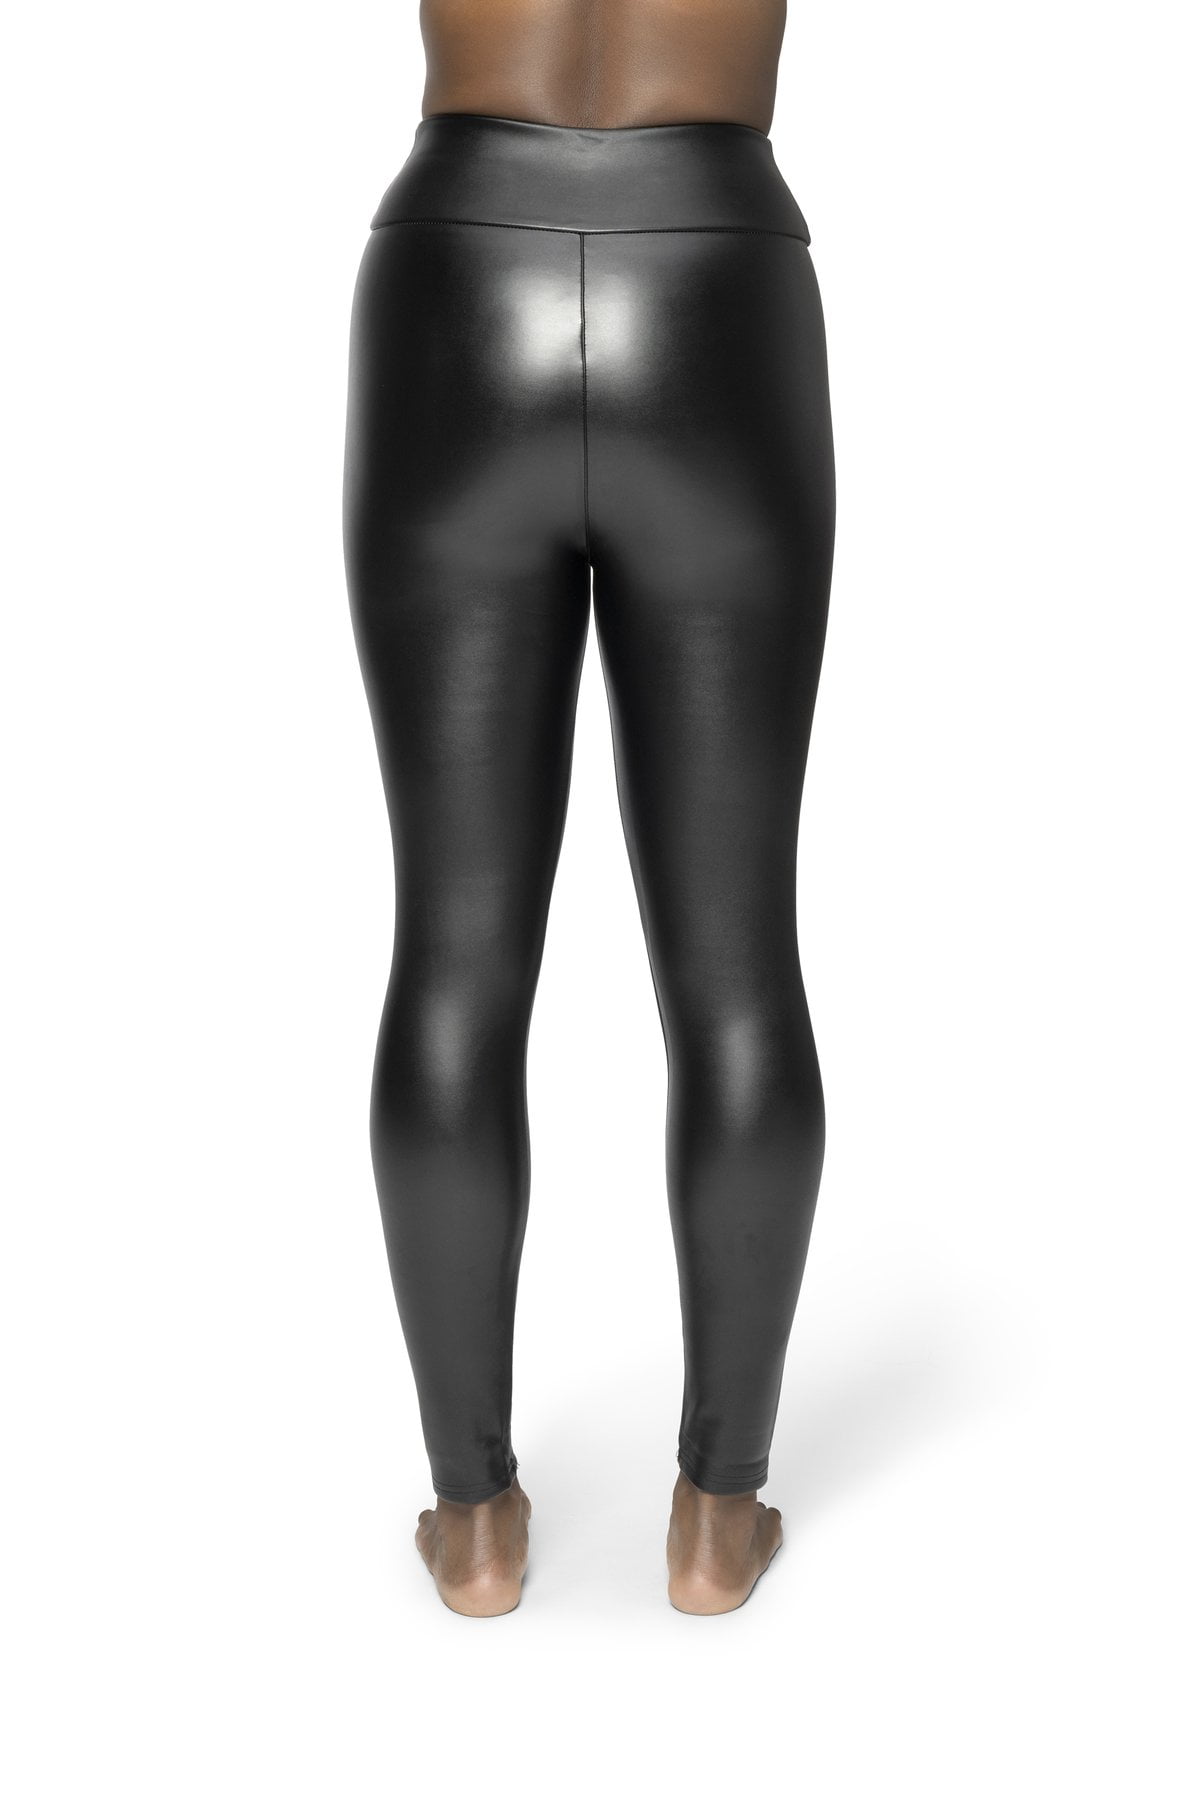 Black leather effect long legging with abdomen control waistband – Tatubaby  Label